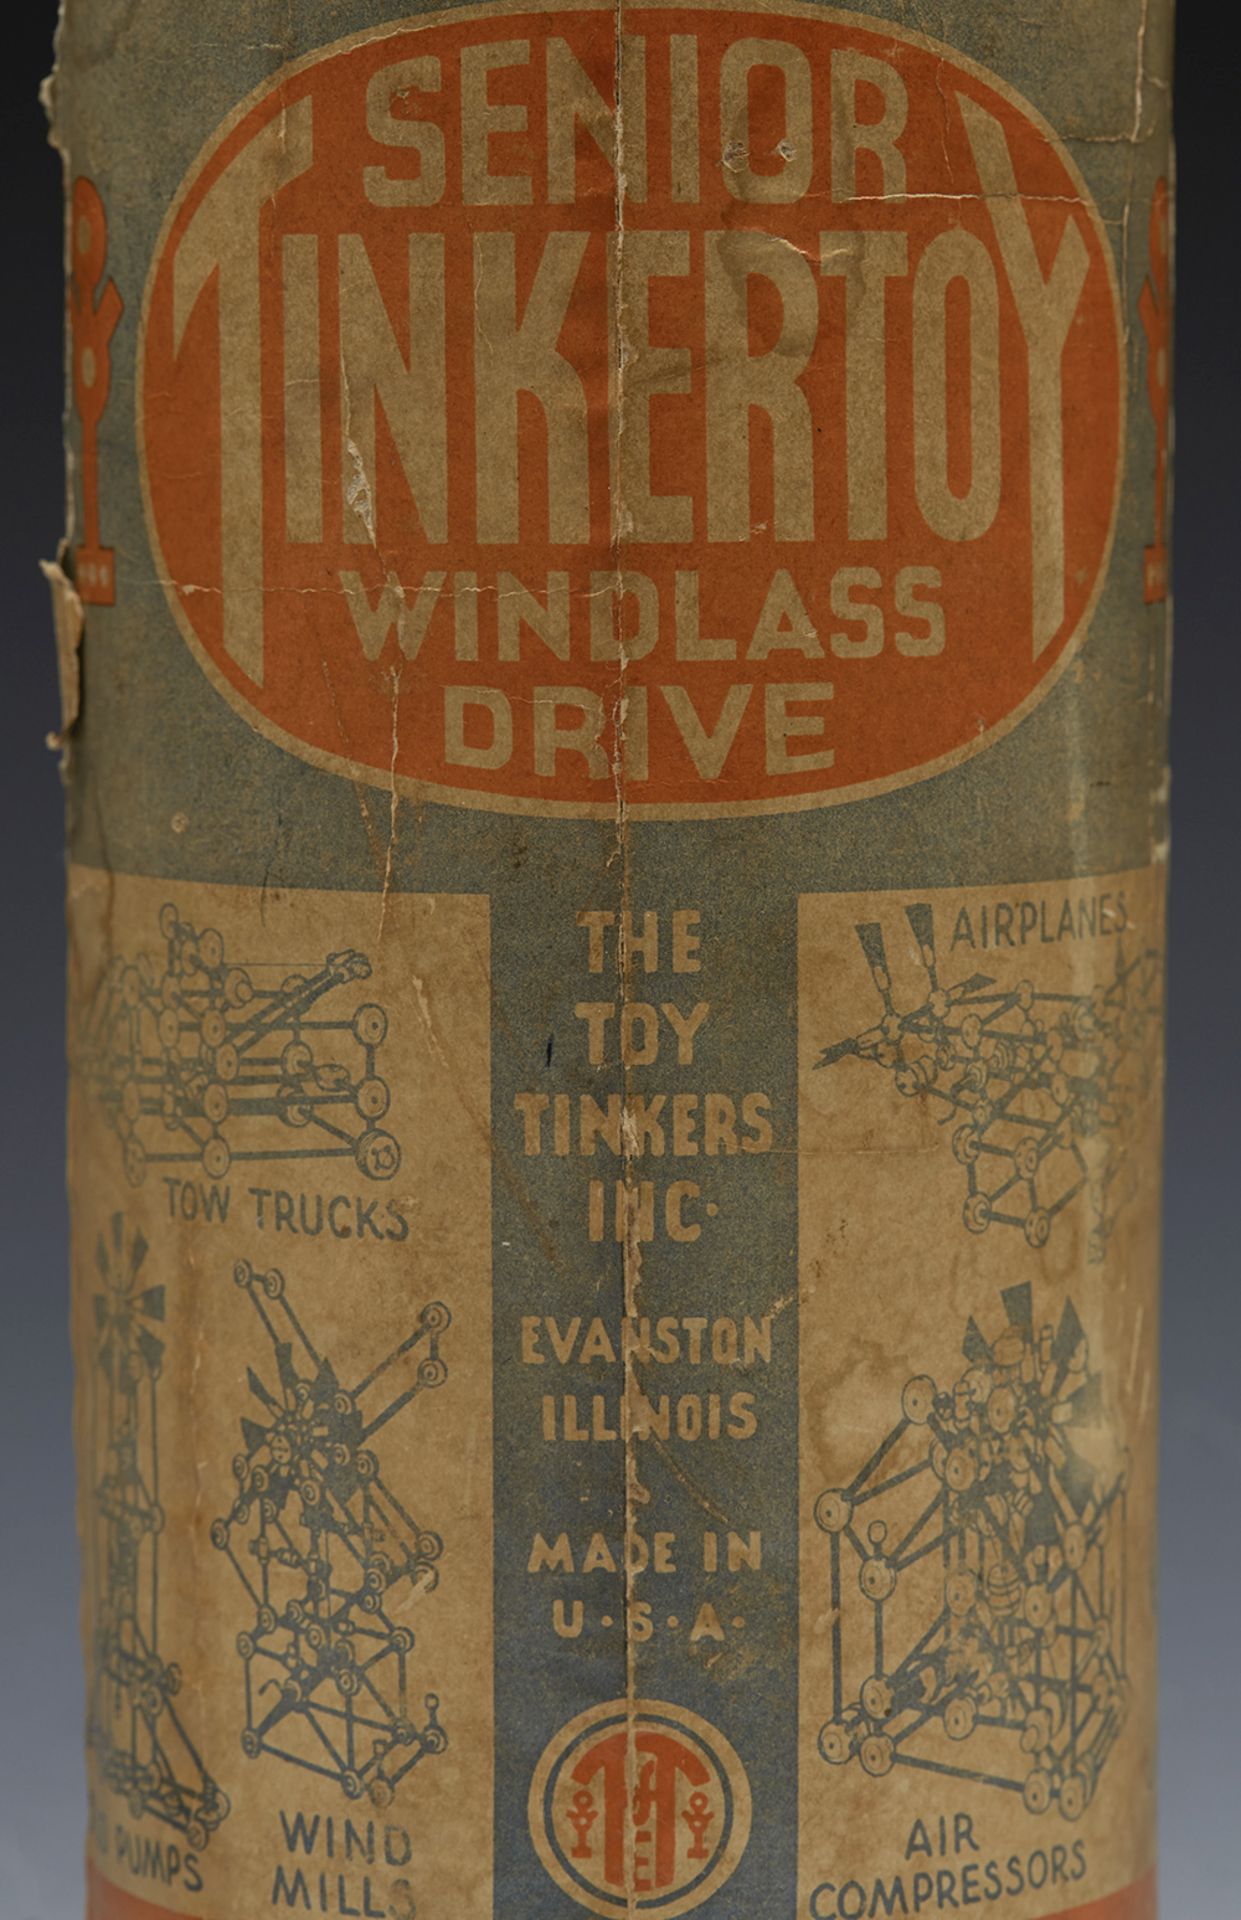 Vintage American Senior Tinkertoy Windlass Drive Toy Early 20Th C. - Image 2 of 10